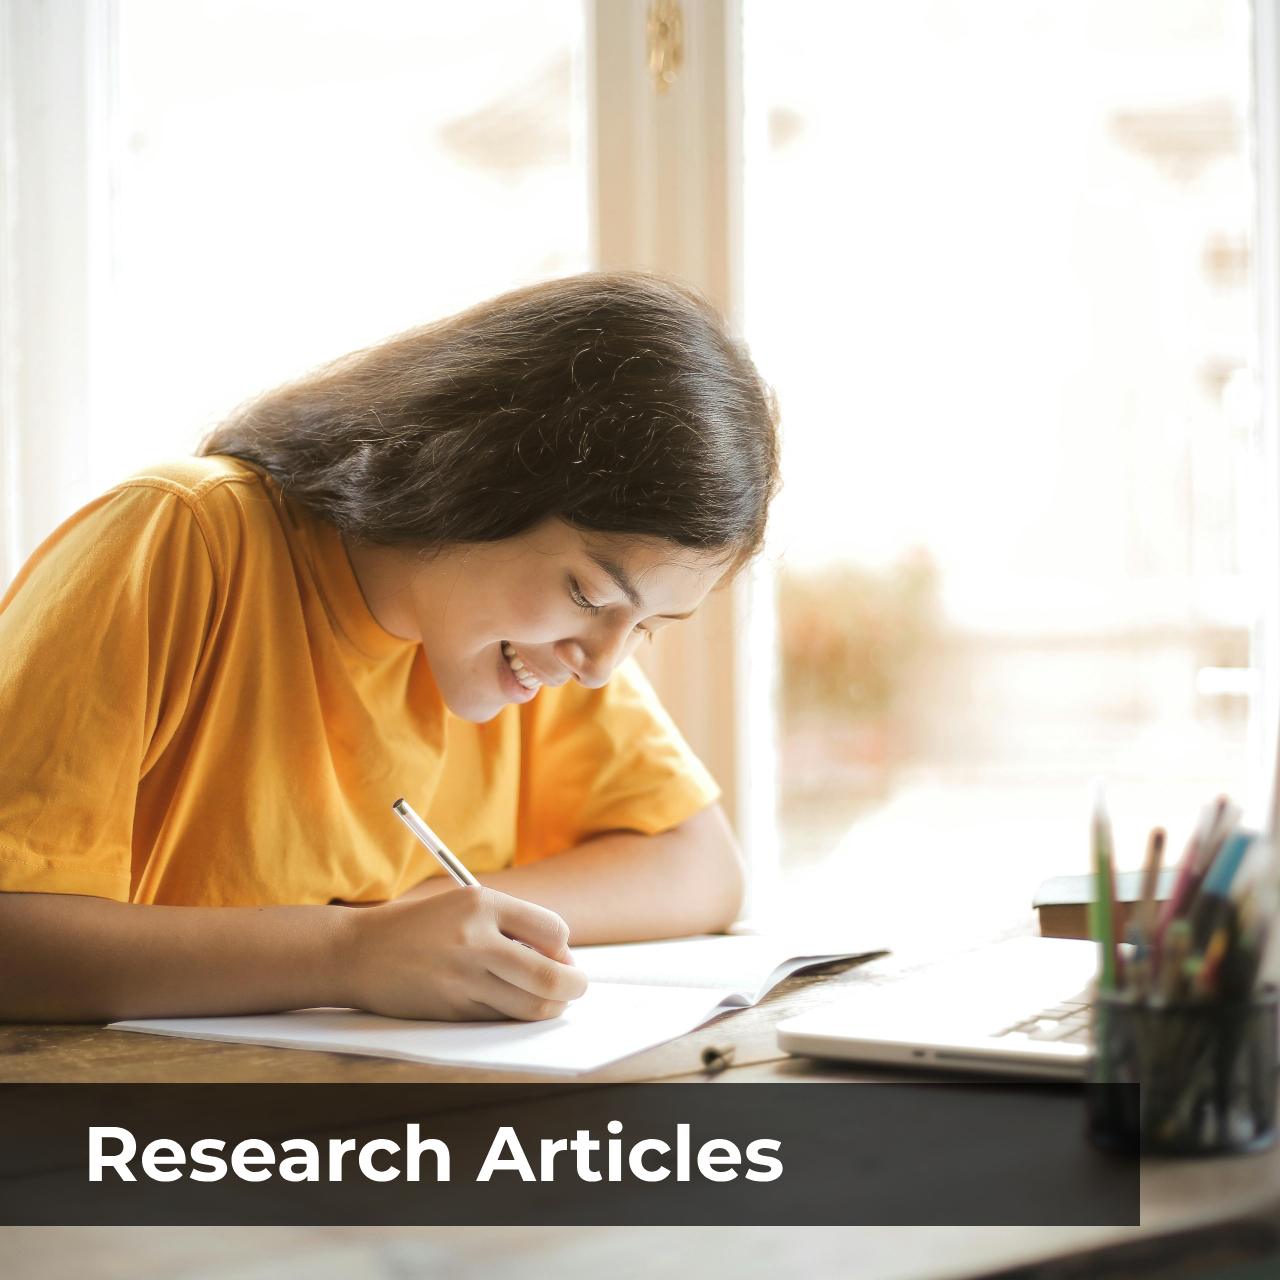 Research Articles